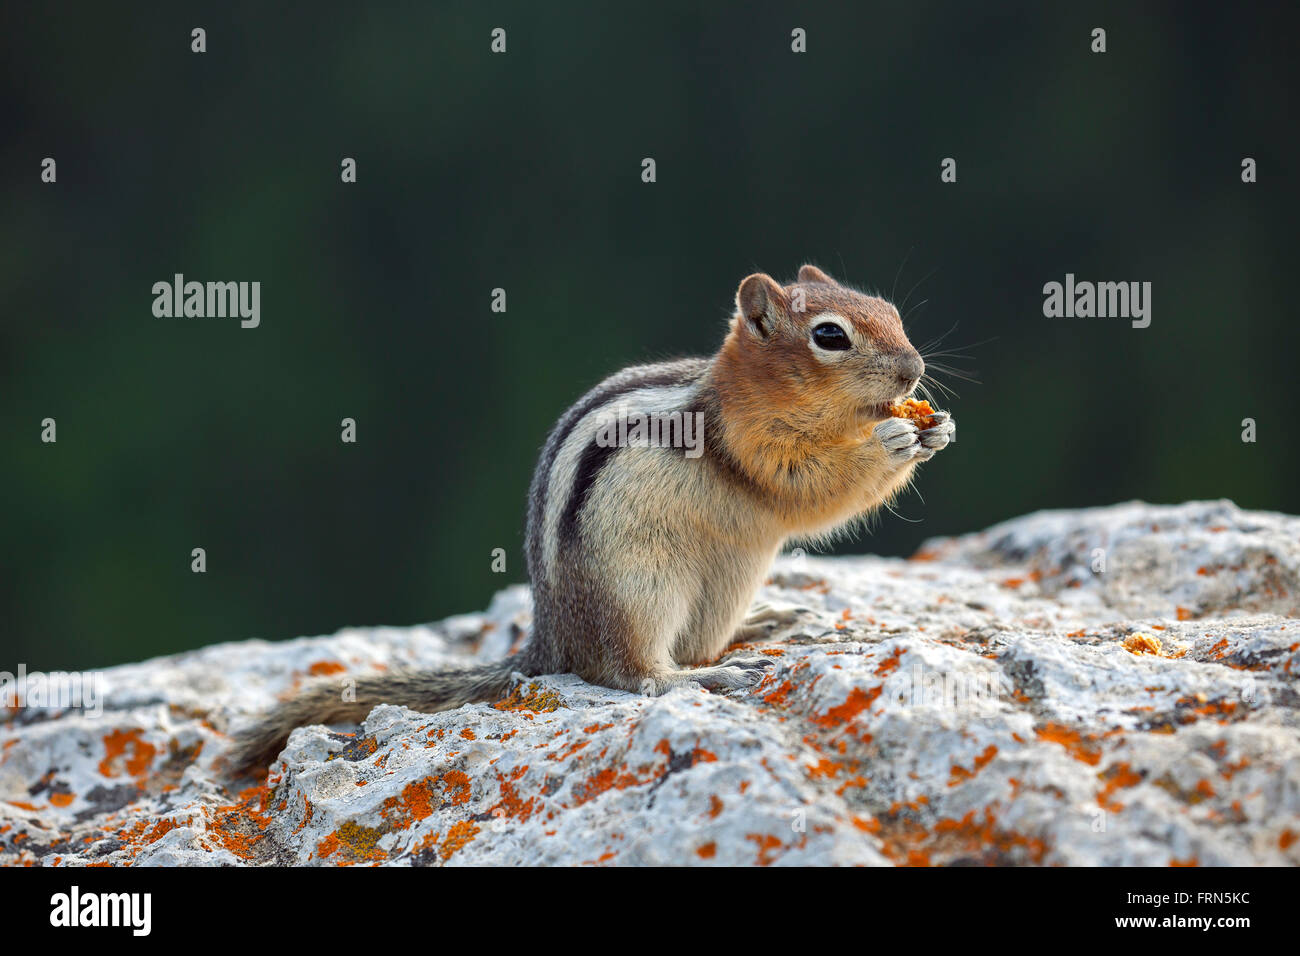 Golden-mantled ground squirrel (Callospermophilus lateralis) on rock feeding on handout, native to western North America Stock Photo